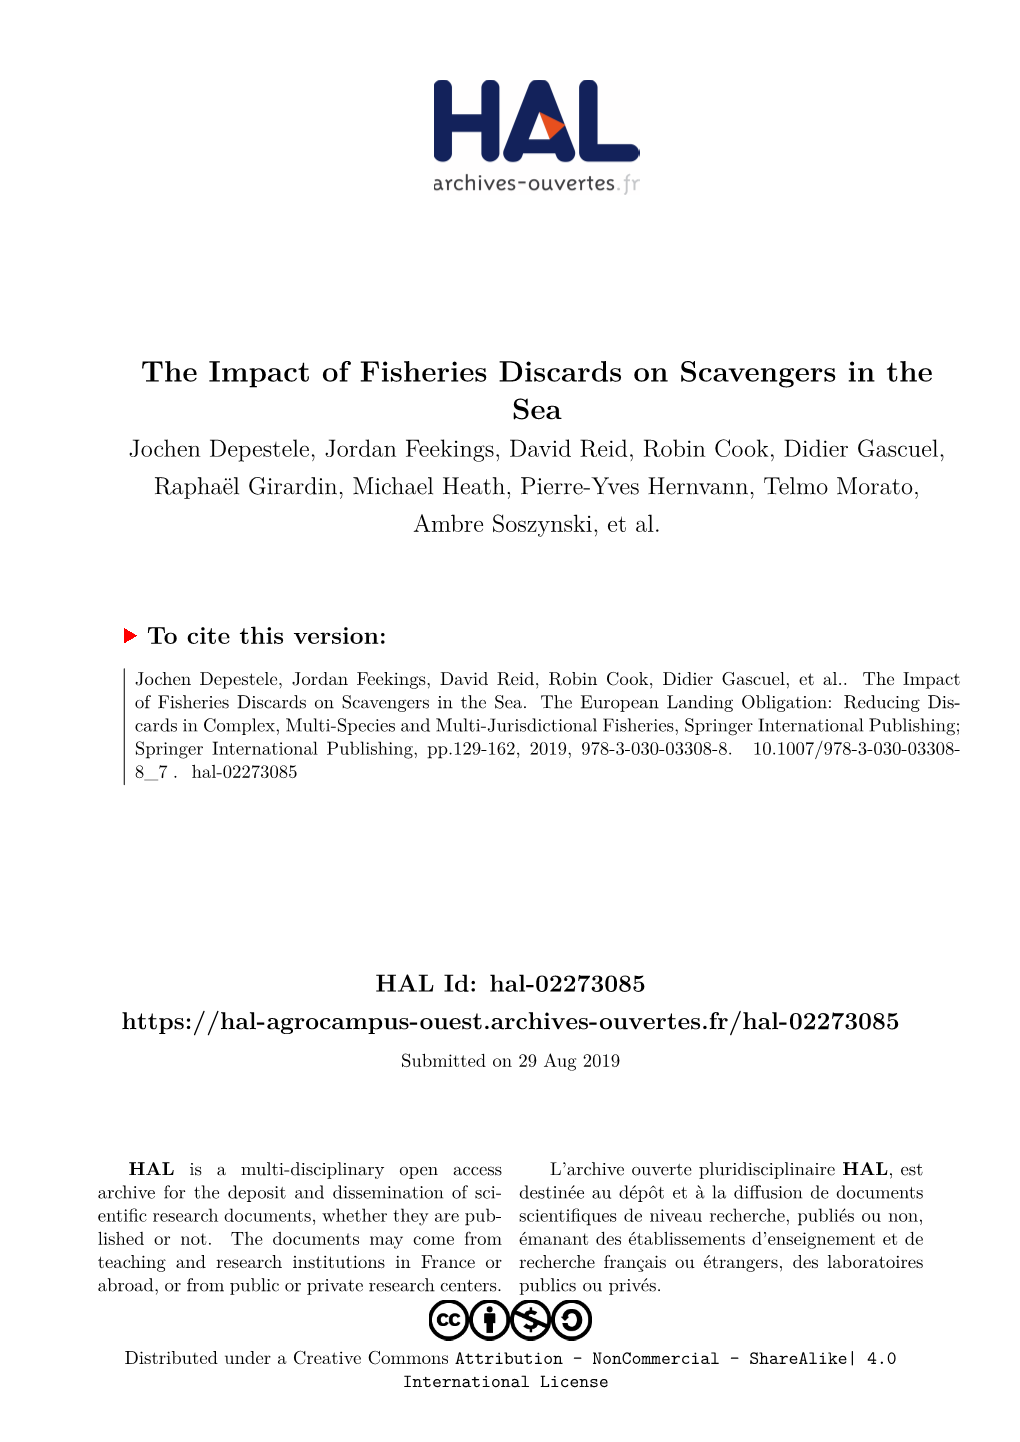 The Impact of Fisheries Discards on Scavengers in The